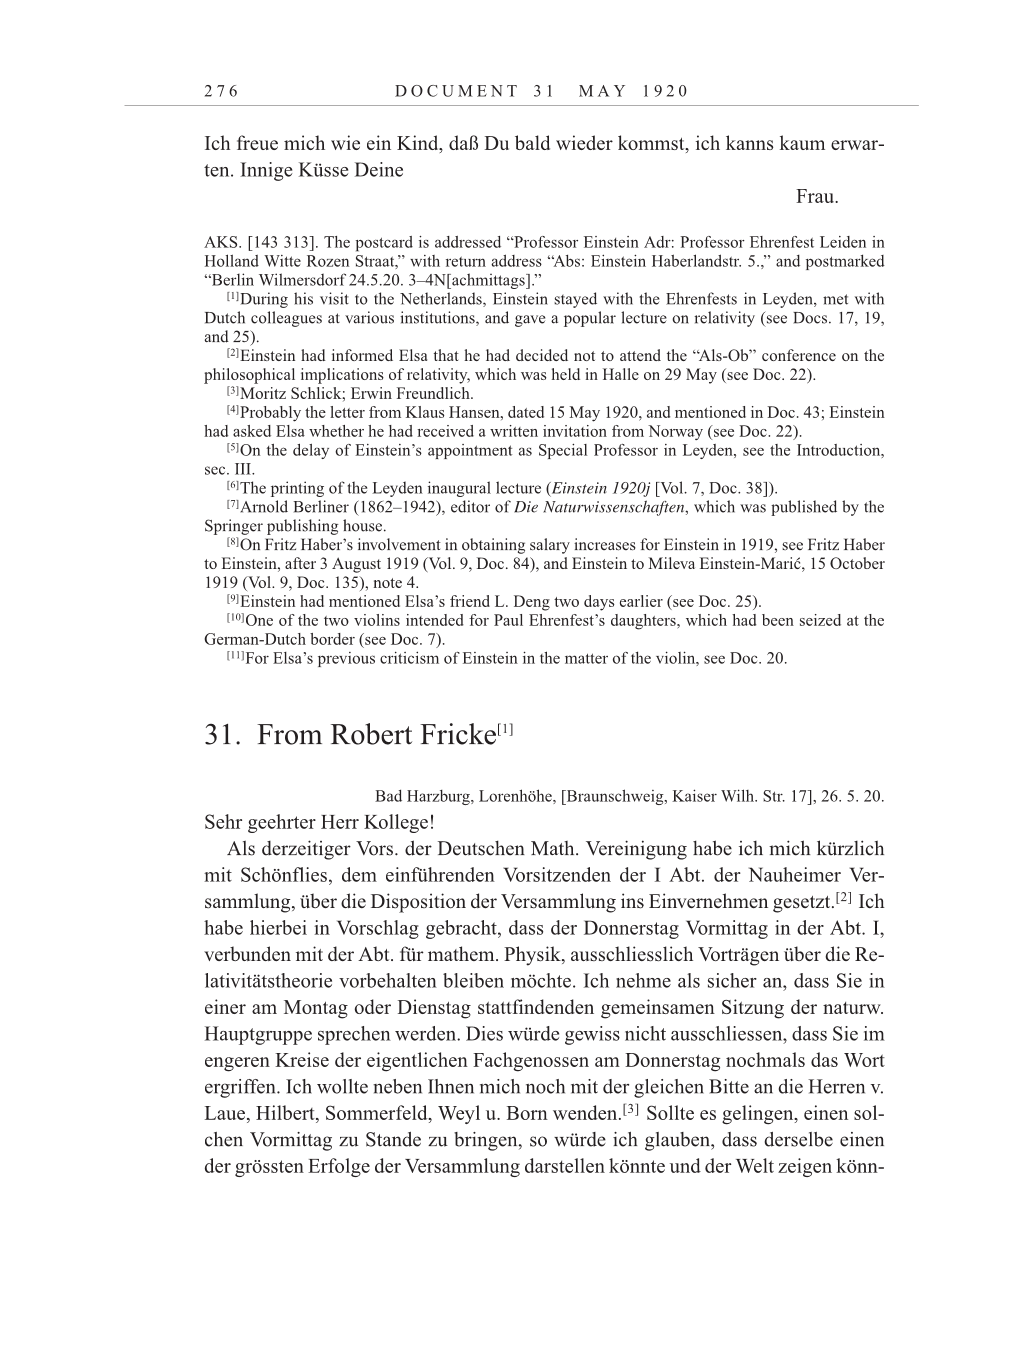 Volume 10: The Berlin Years: Correspondence May-December 1920 / Supplementary Correspondence 1909-1920 page 276